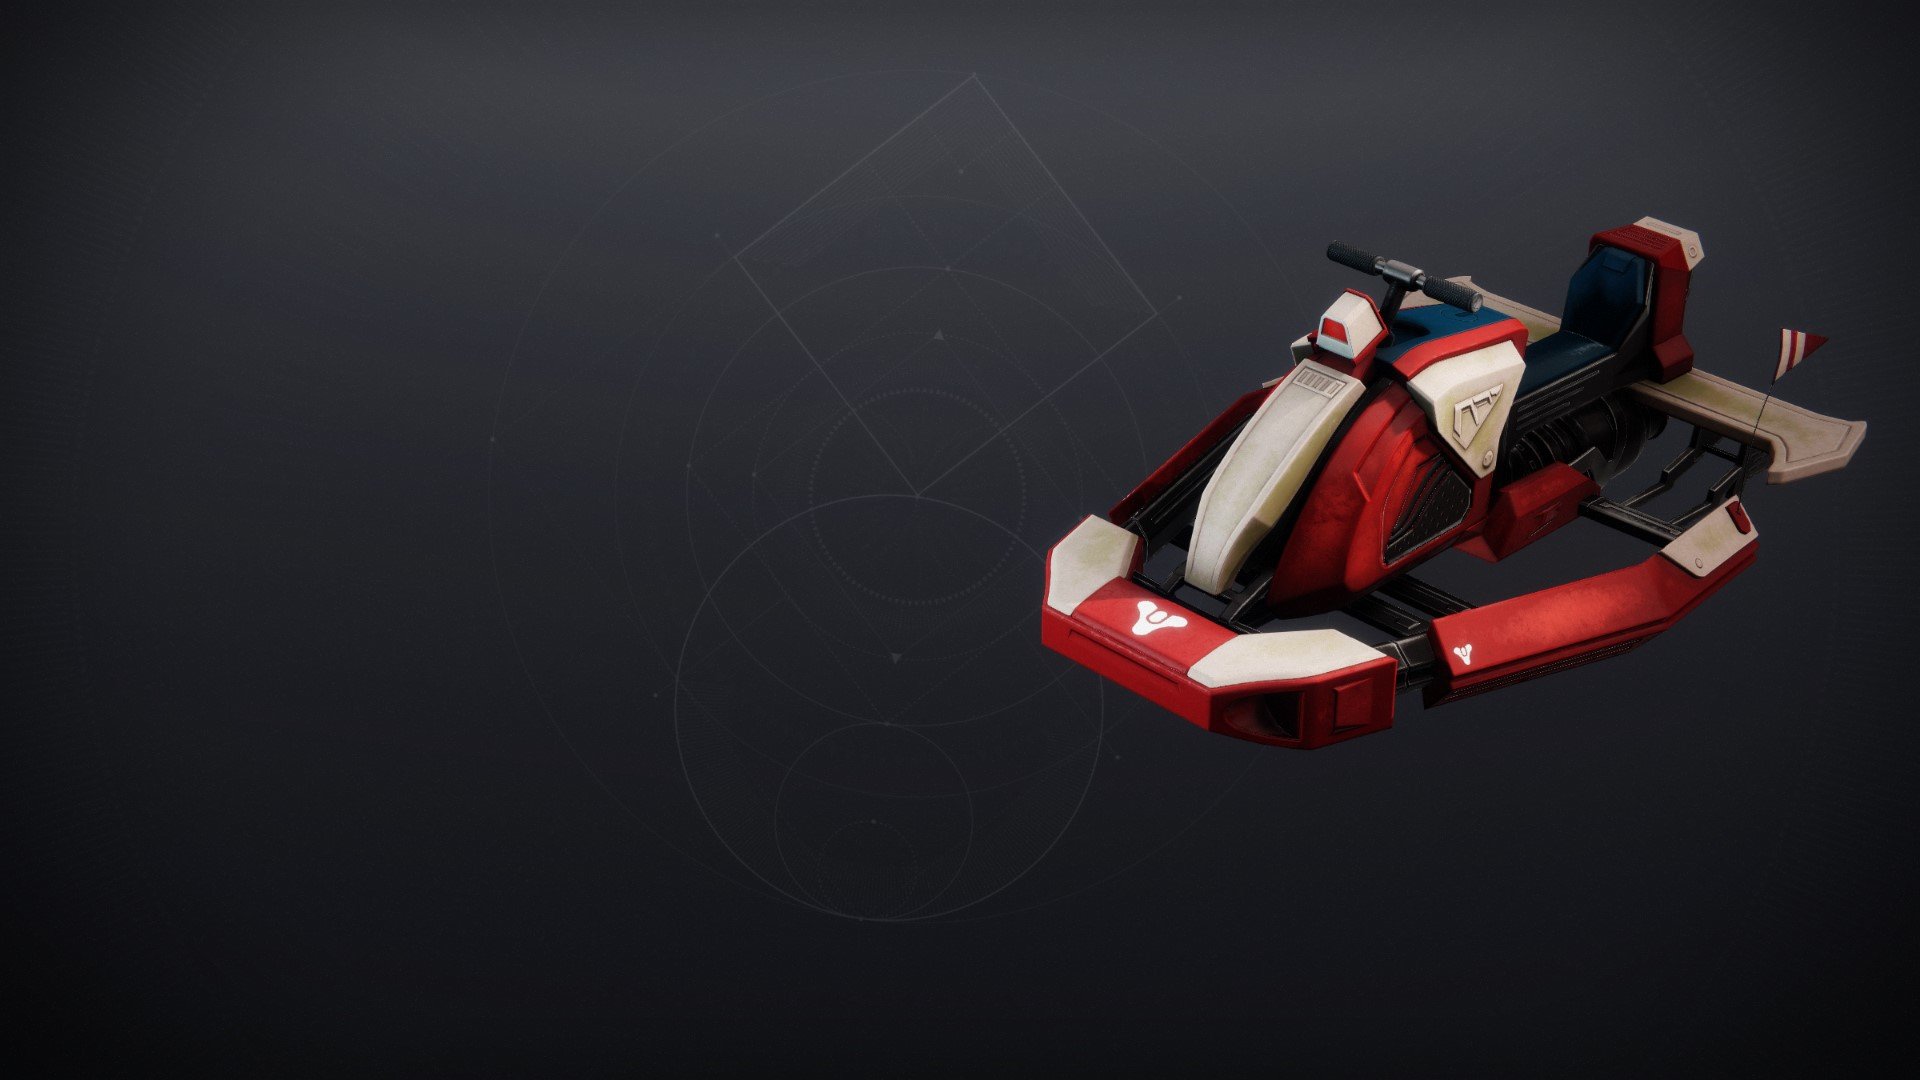 An in-game render of the Quadracycle.